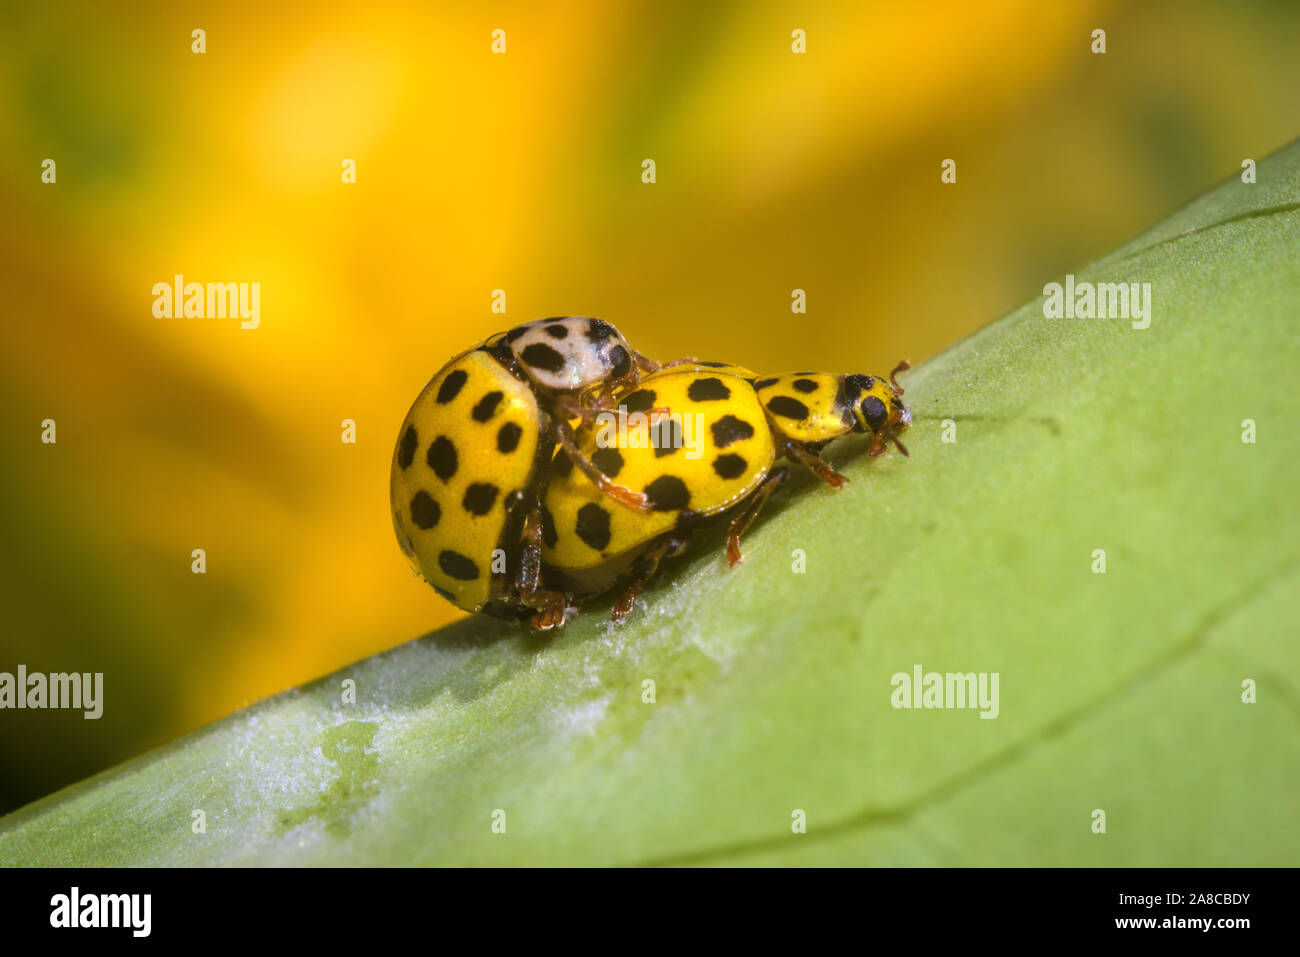 Two yellow 21-spot ladybugs mating on a green leaf outdoors with a yellow flower in the background. Stock Photo